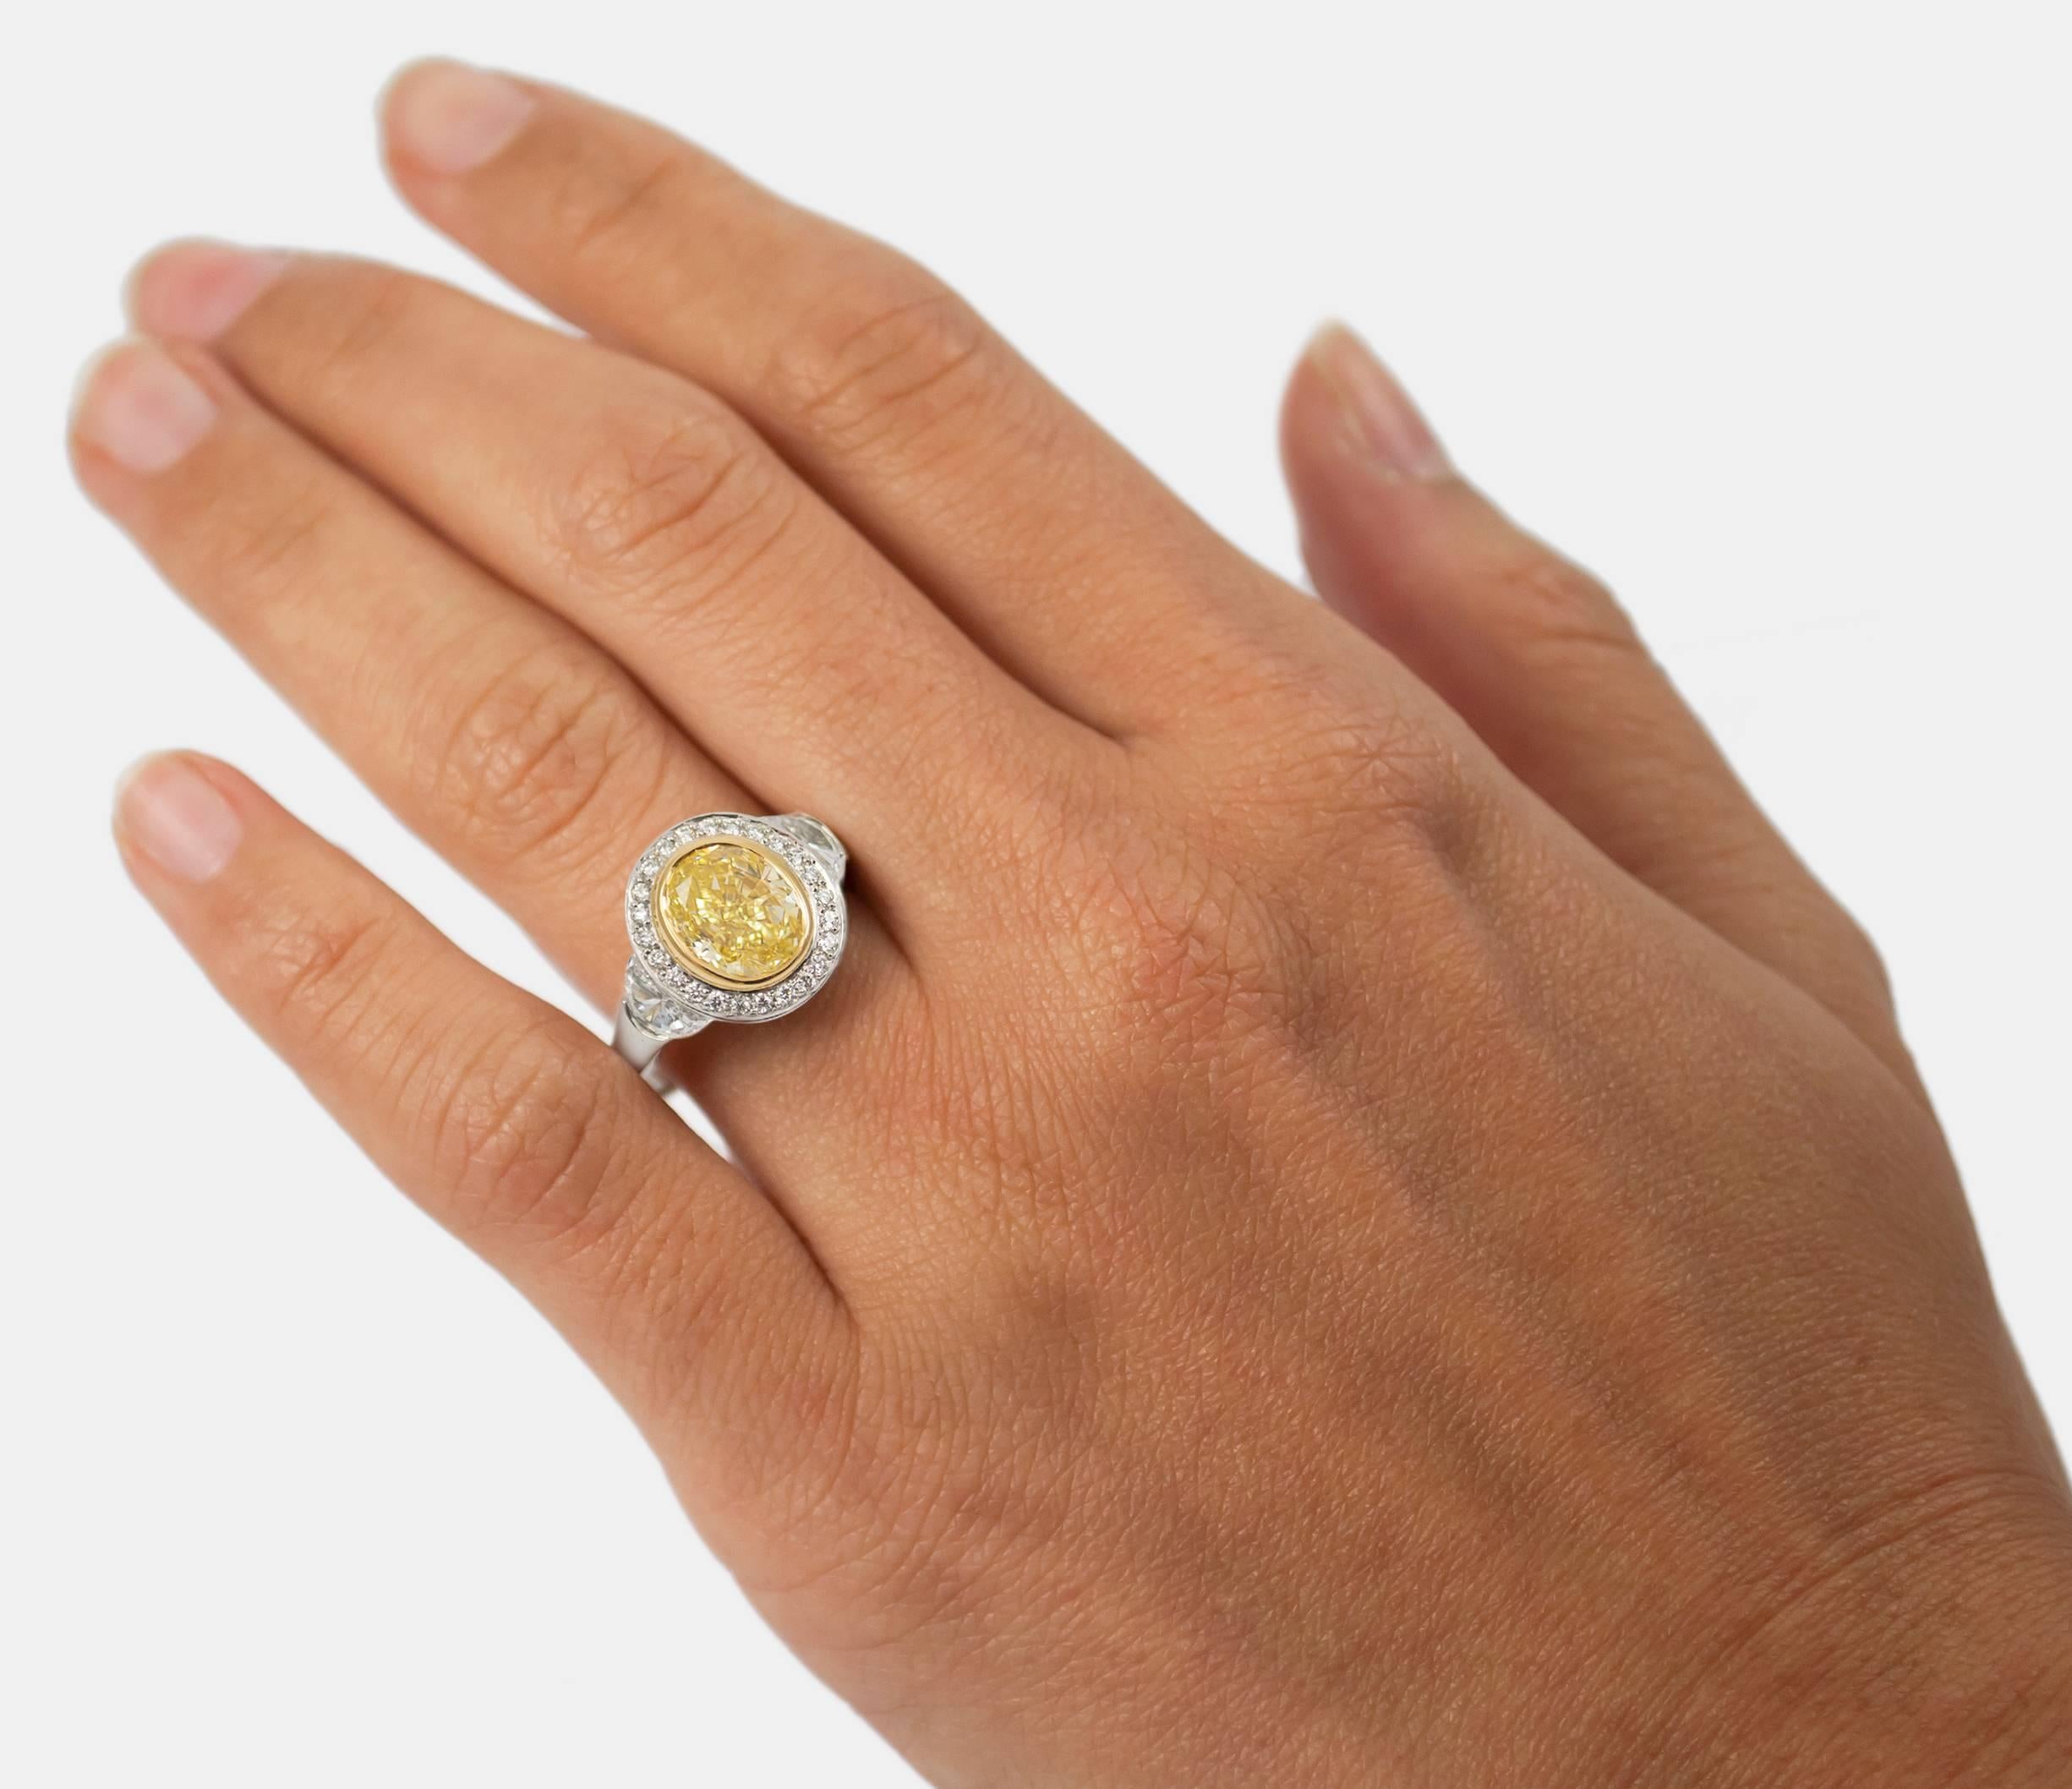 This breathtaking piece features a 2.07 carat Fancy Yellow Oval Diamond of SI1 clarity, flanked by 2 half moons weighing 0.65 ctw. Truly timeless, the mounting is made of platinum with an 18k yellow gold setting to showcase the natural beauty of